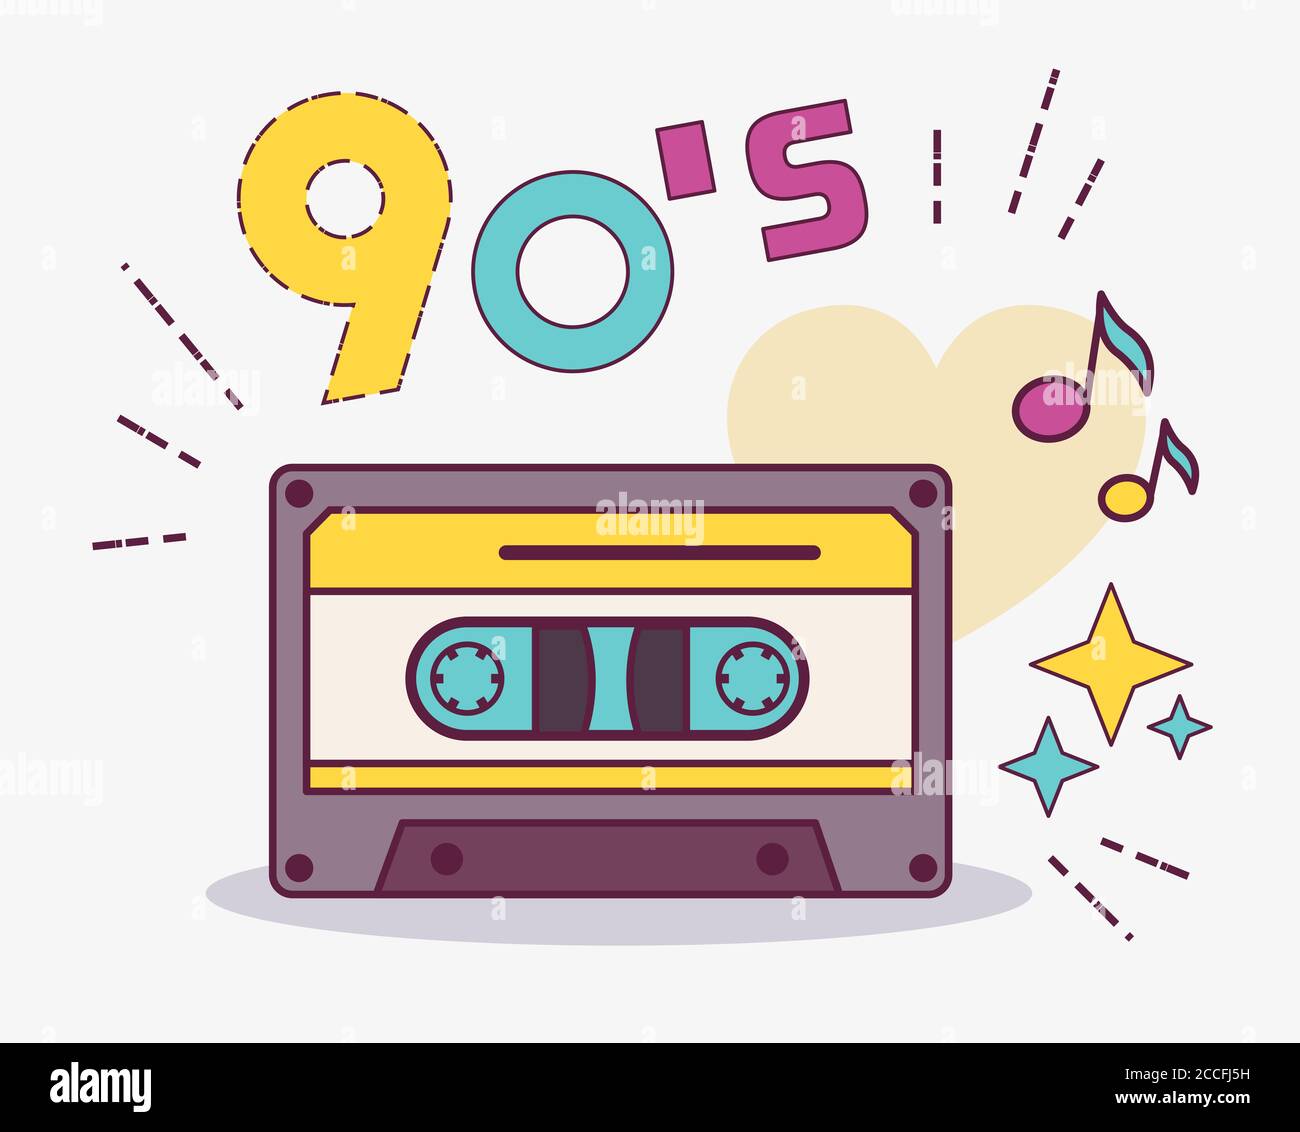 90s pop culture Cut Out Stock Images & Pictures - Alamy